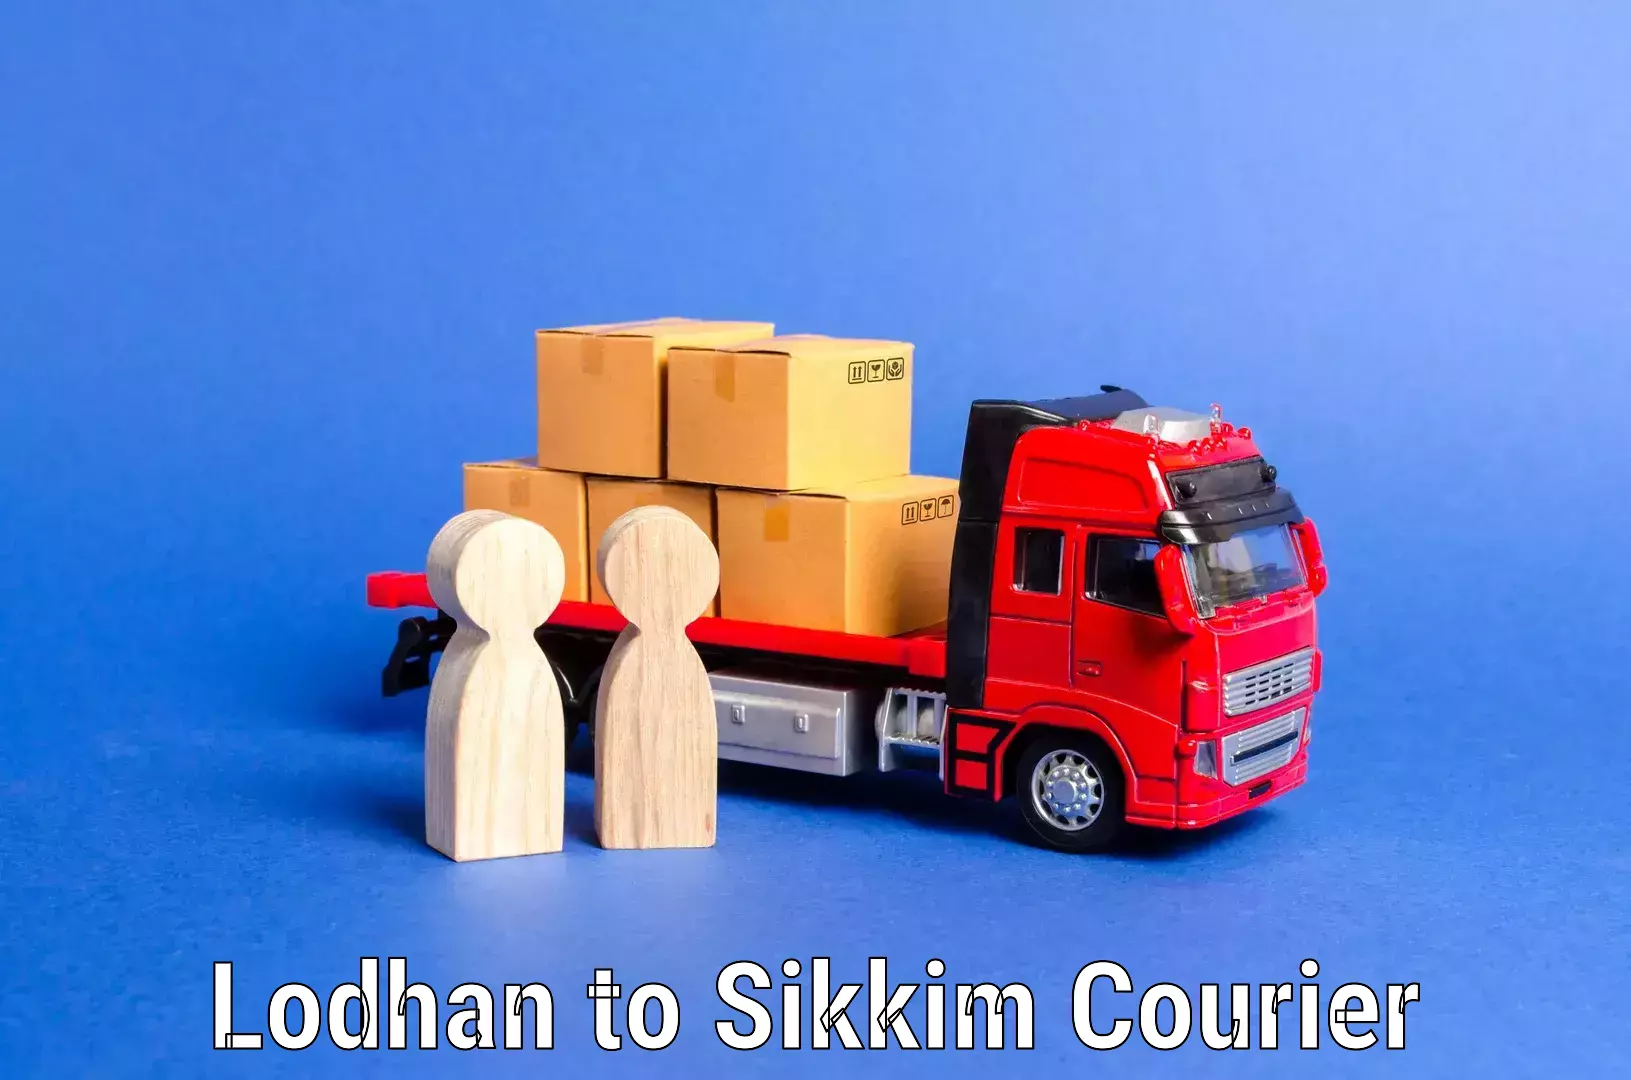 Home relocation experts Lodhan to Sikkim